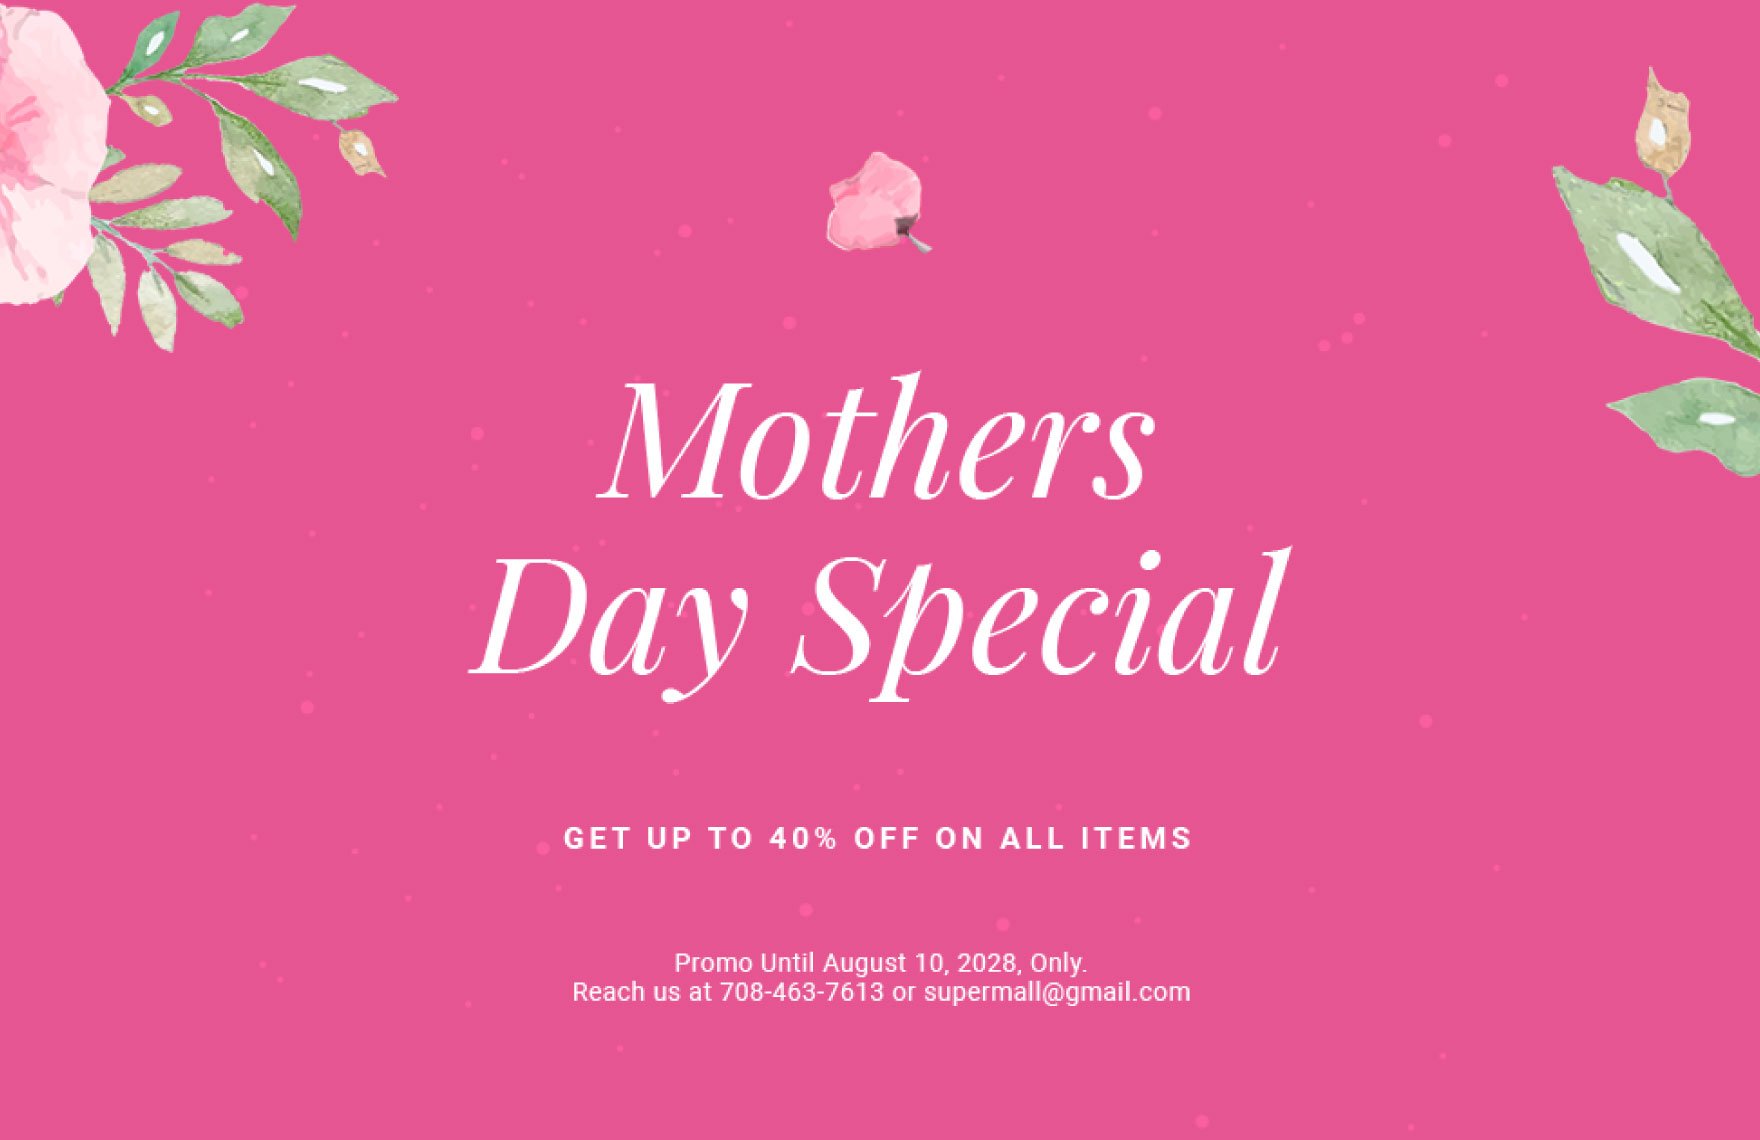 Mothers Day Special Sale Facebook Post Template